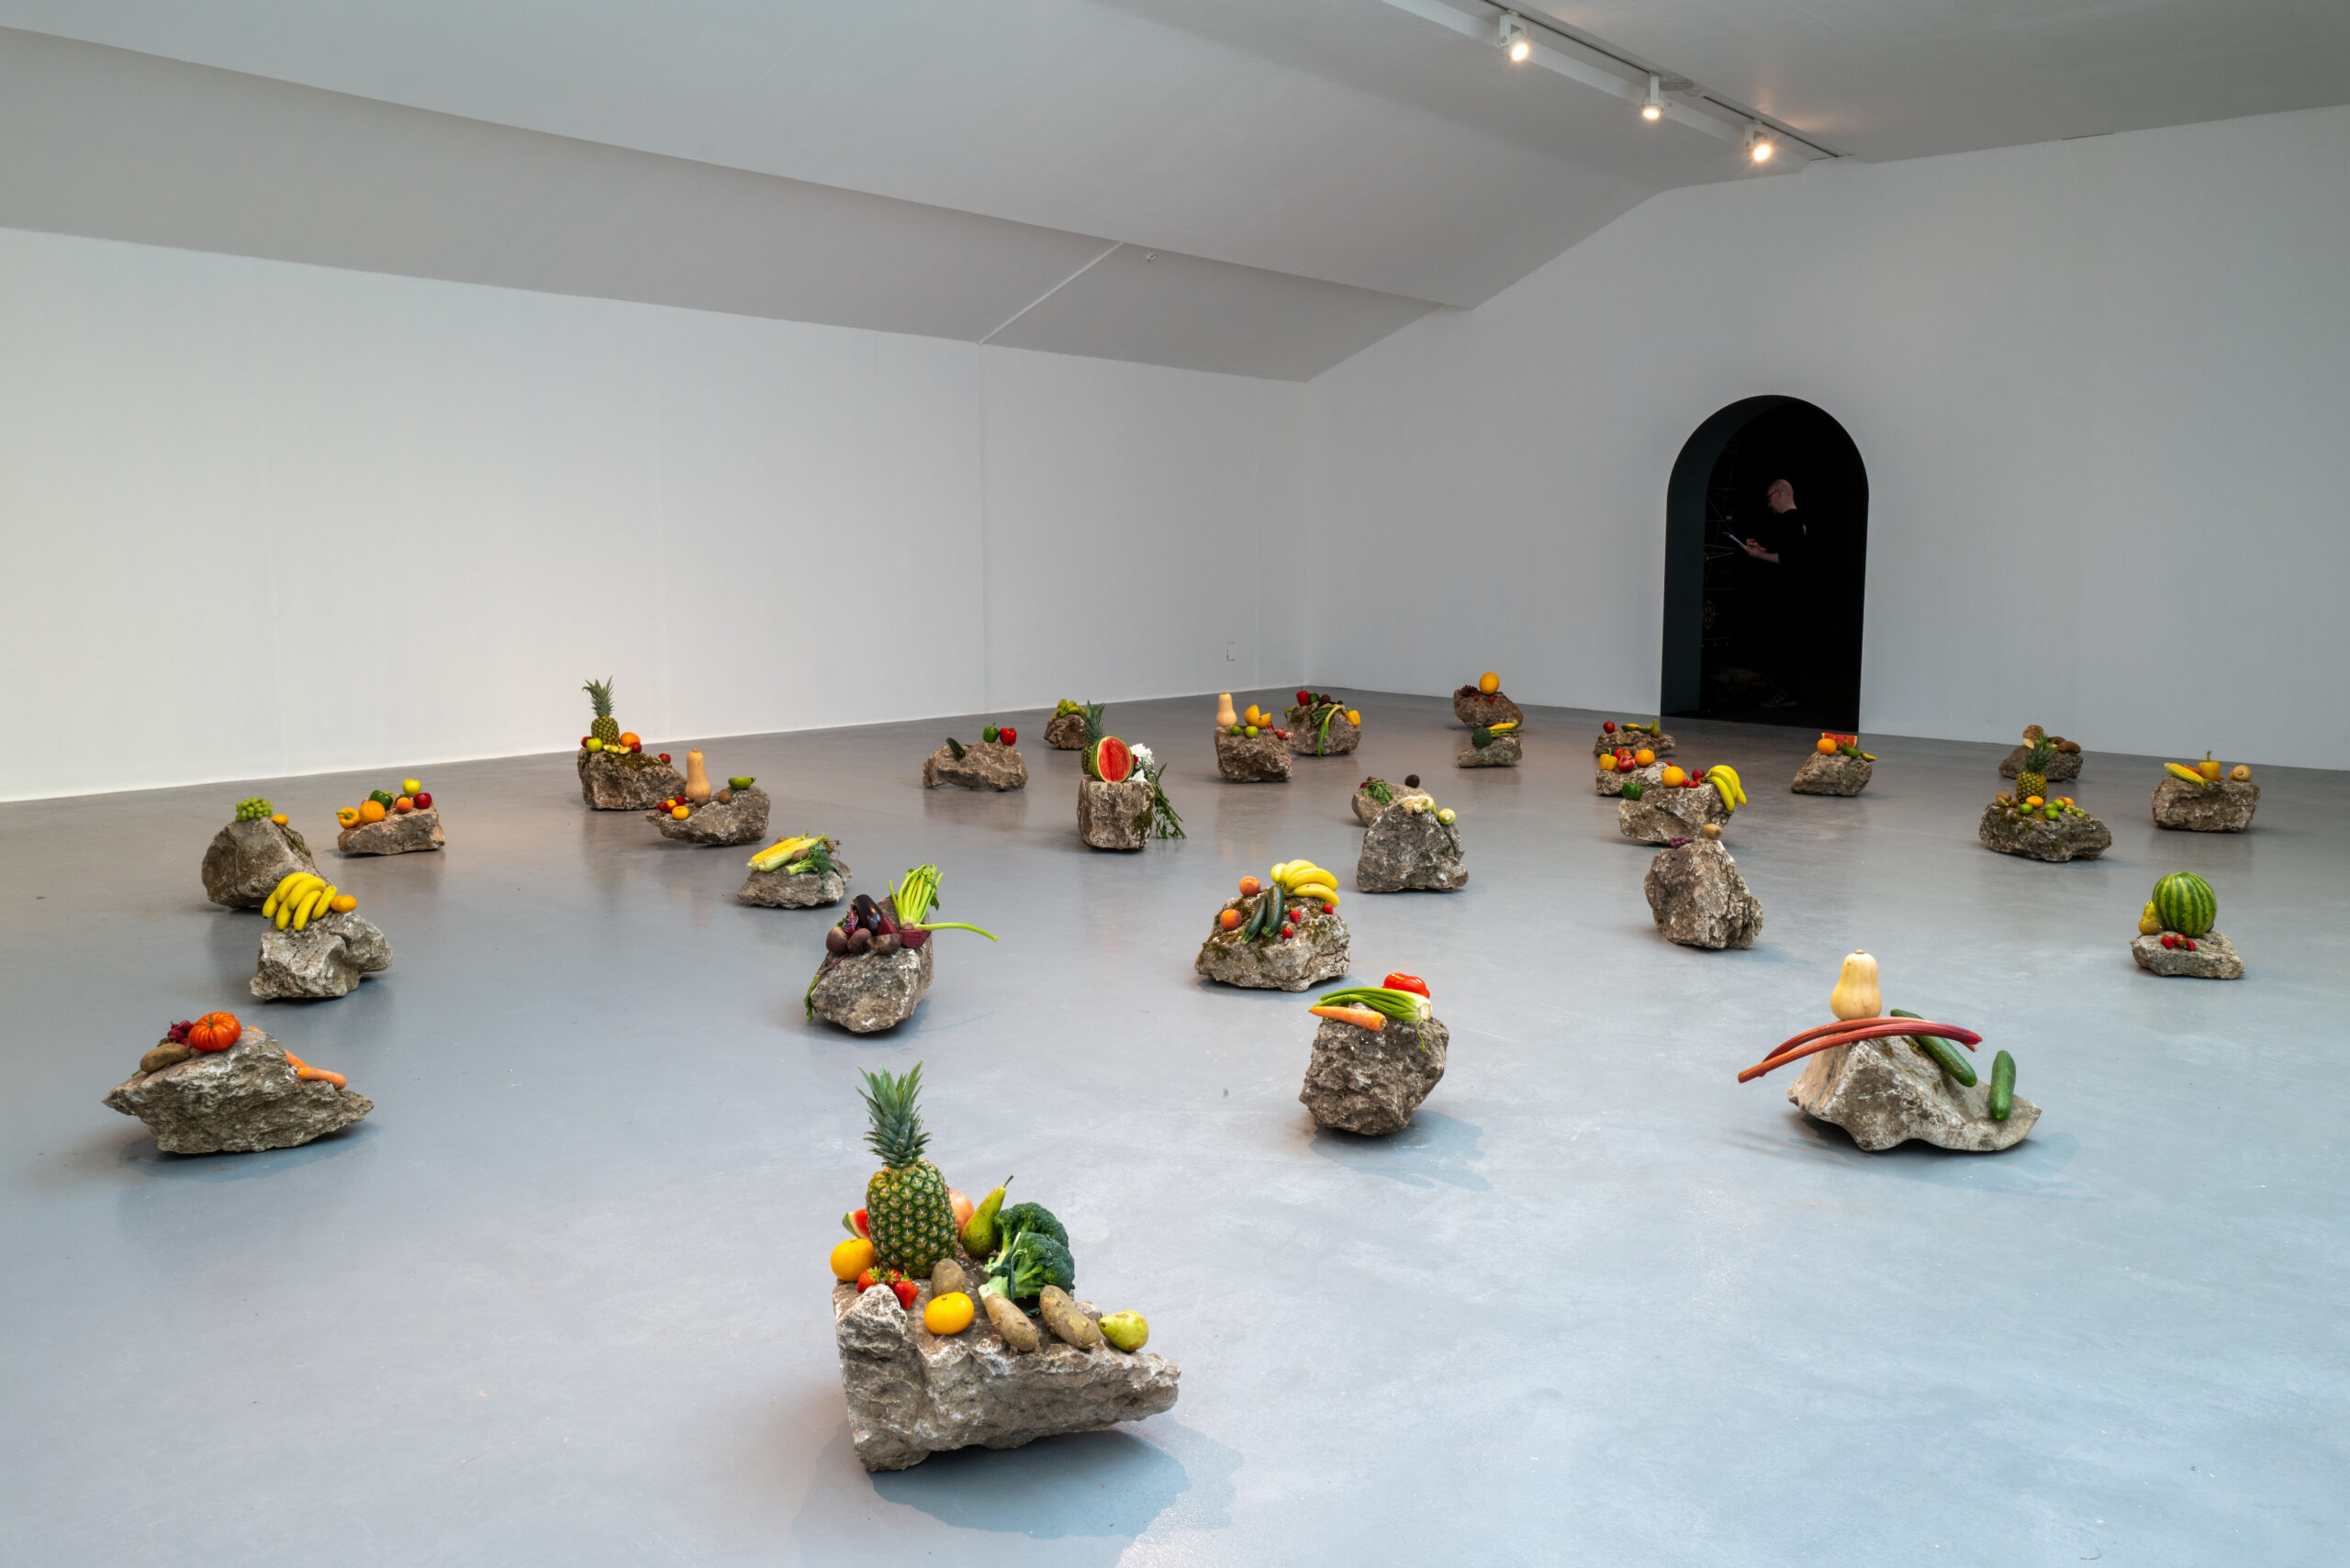 A large white room with thirty medium sized rocks scattered across the floor containing various fruits and vegetables on each surface.